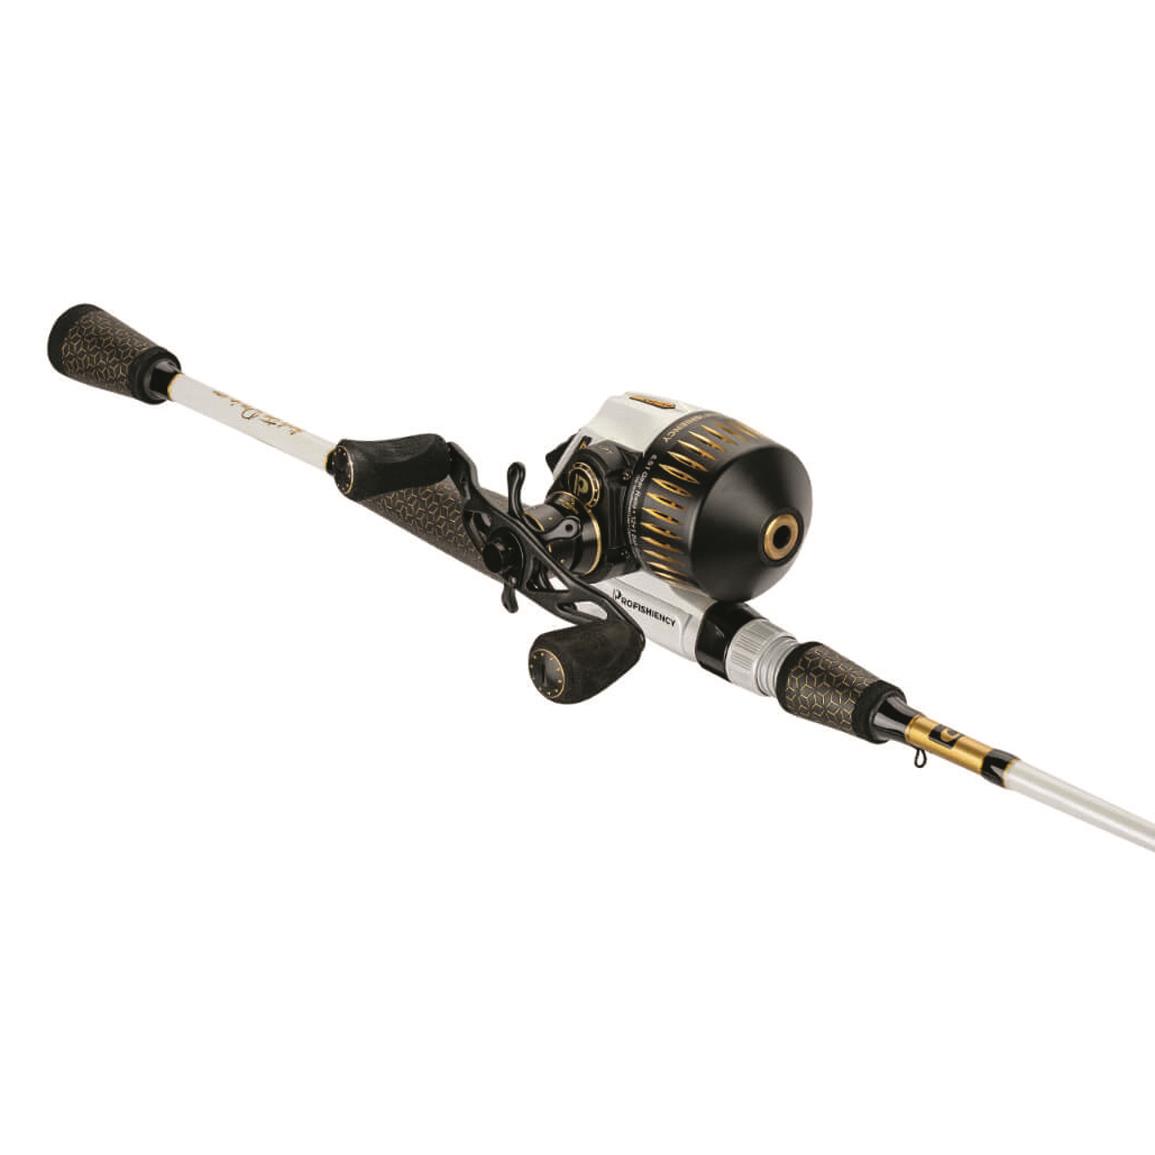 Zebco Omega Pro Spincast Fishing Rod and Reel Combo - 708624, Spincast  Combos at Sportsman's Guide